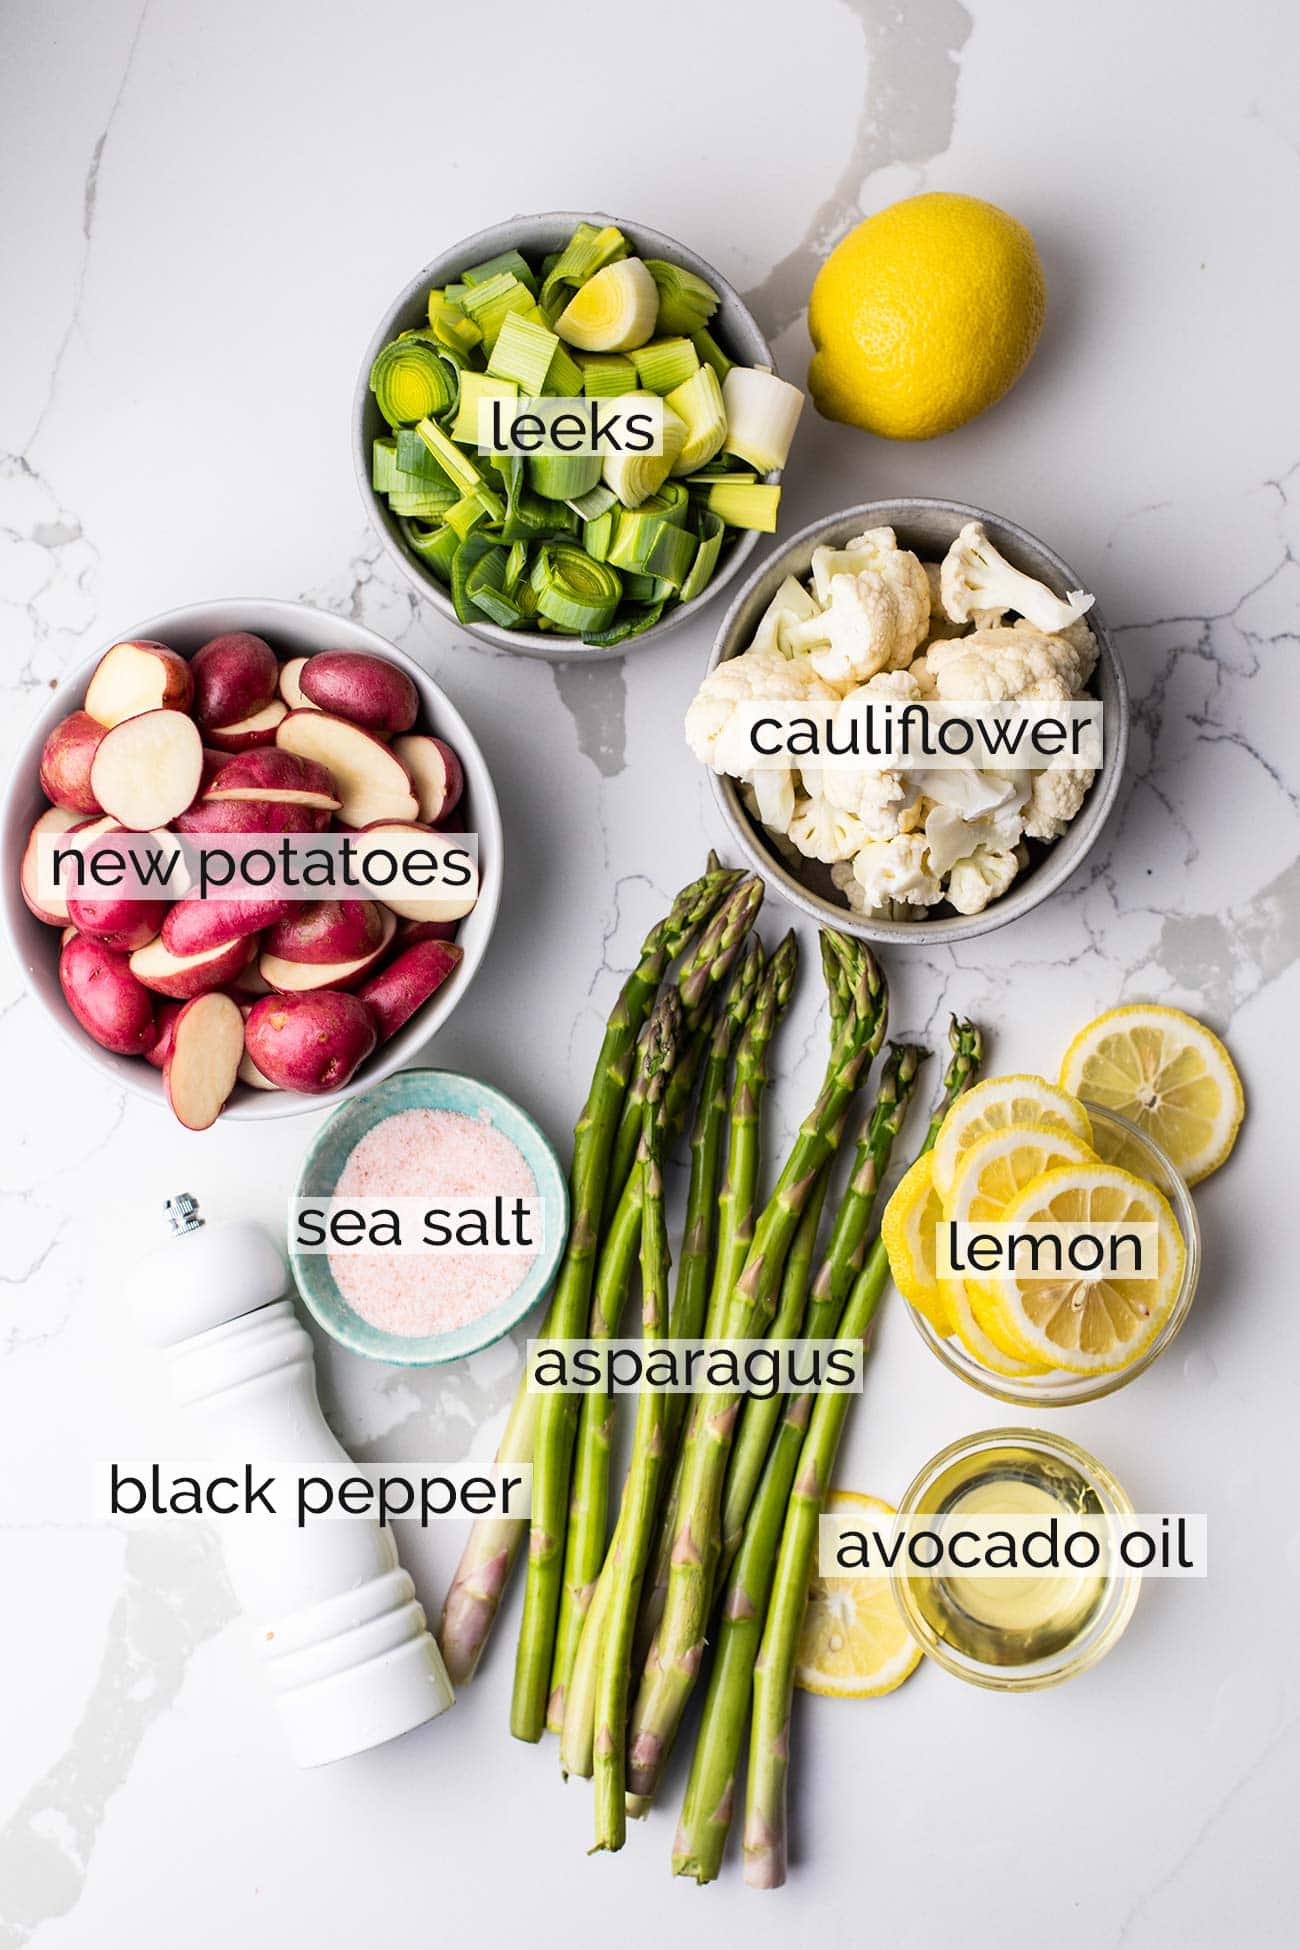 The ingredients needed for spring roasted vegetables shown with labels.